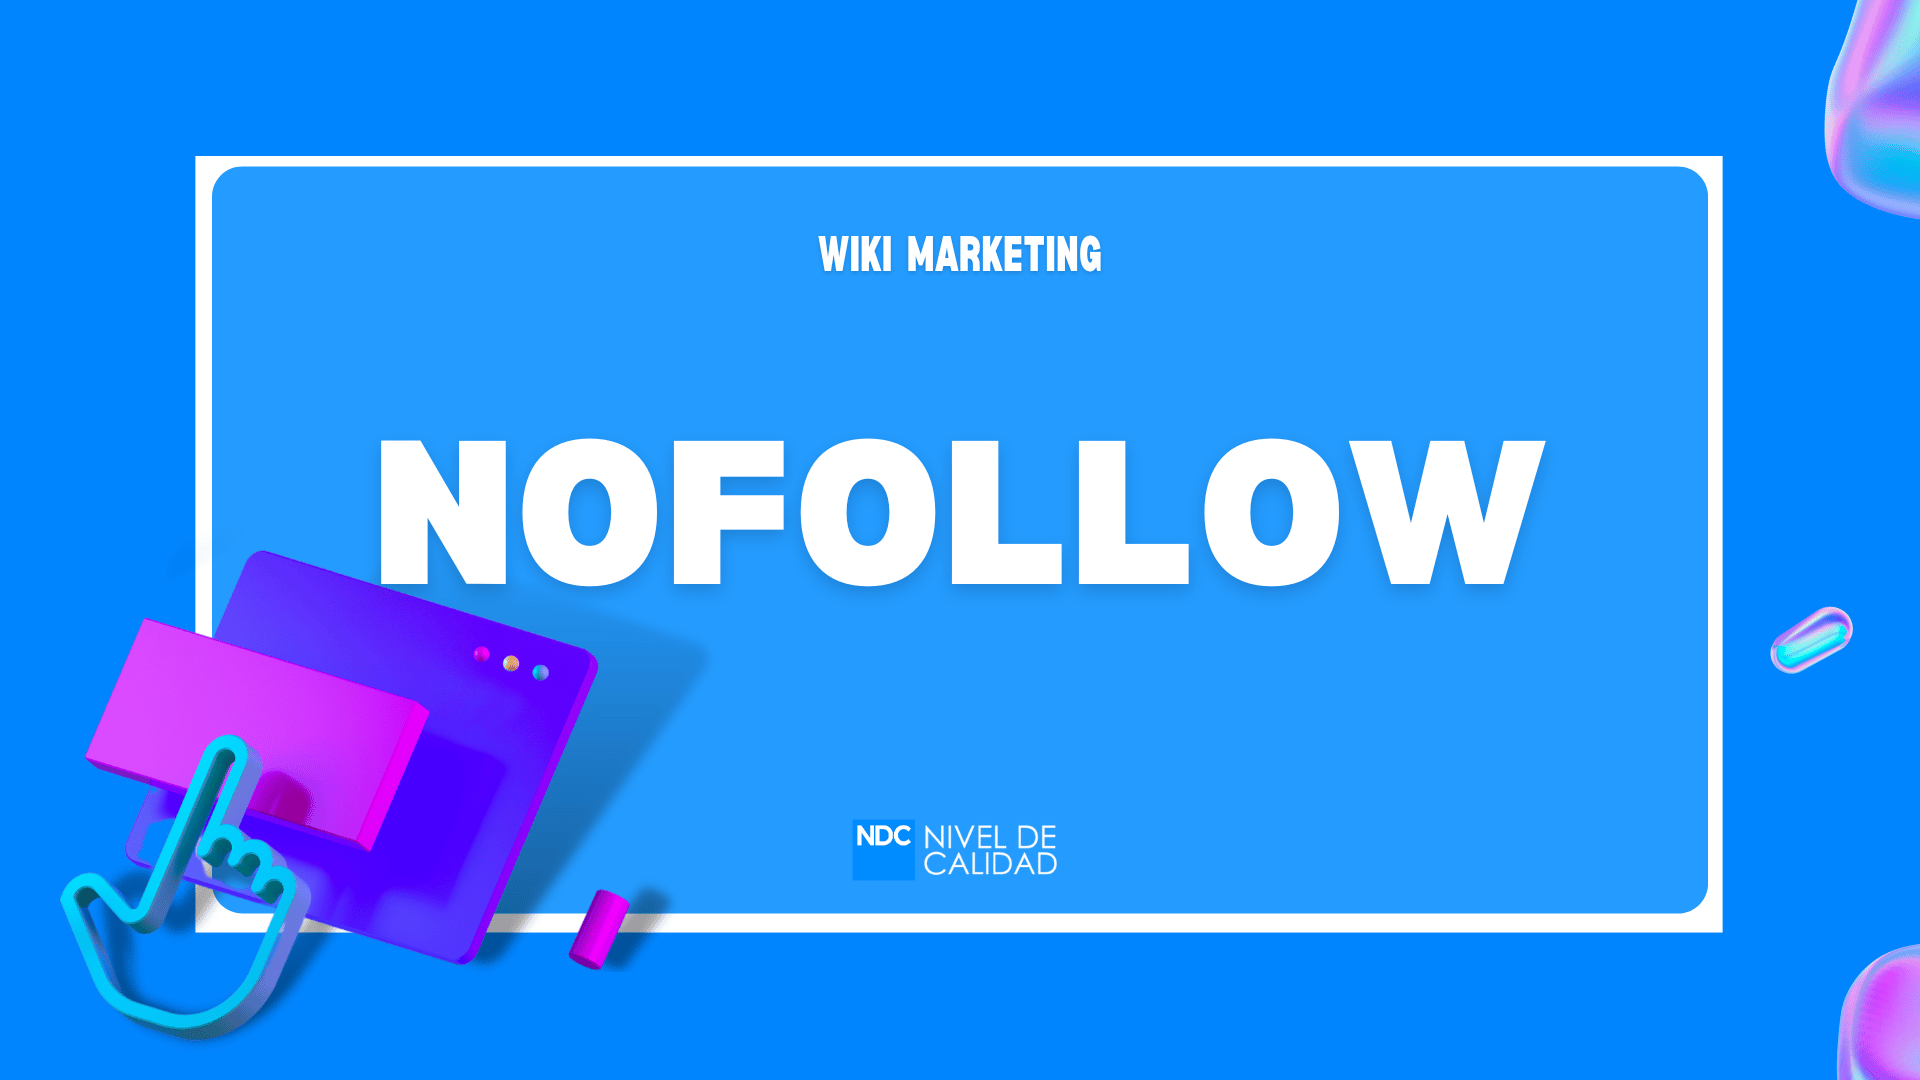 Nofollow Vs Dofollow Links What Is The Difference?